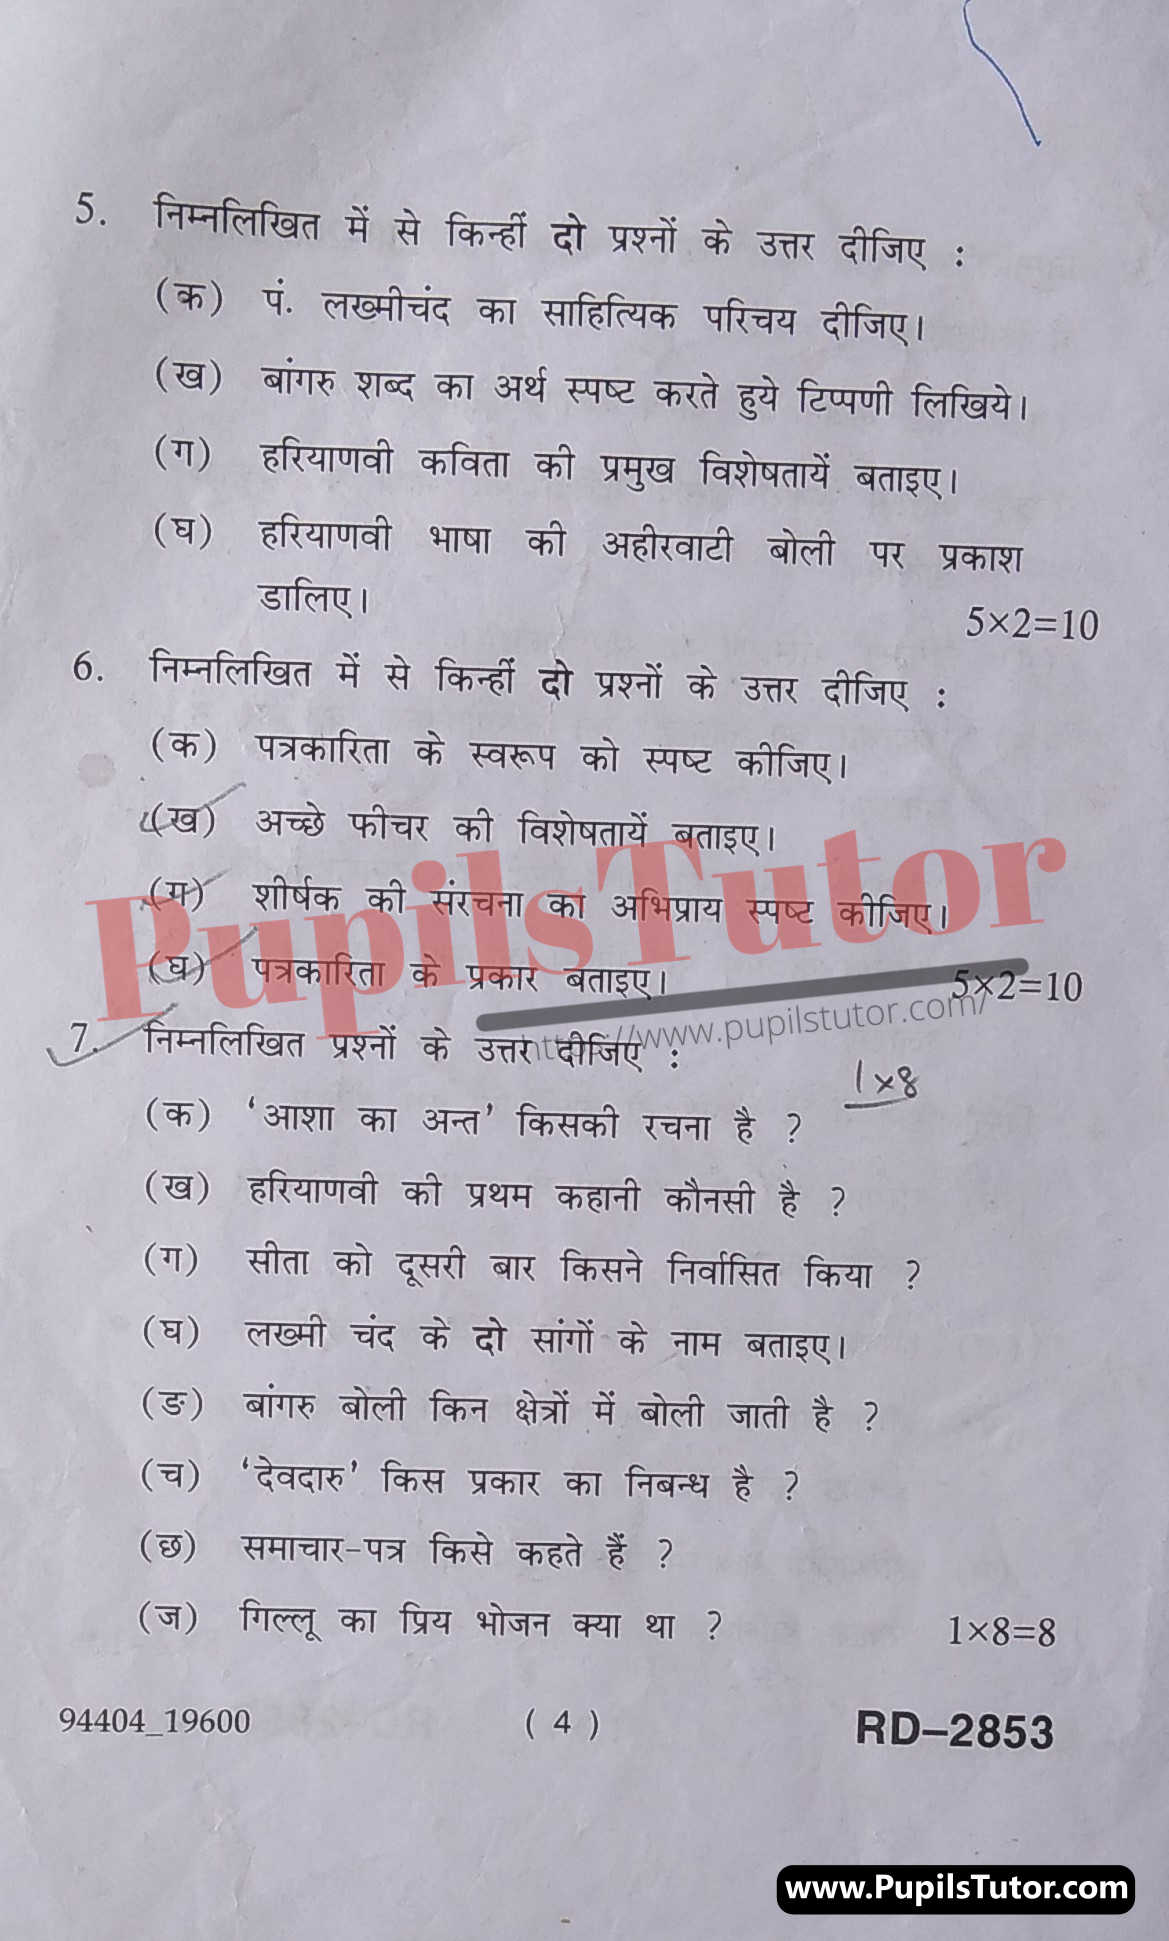 MDU (Maharshi Dayanand University, Rohtak Haryana) Pass Course And Honors (B.A. – Bachelor of Arts) Hindi Important Questions Of July, 2021 Exam PDF Download Free (Page 4)